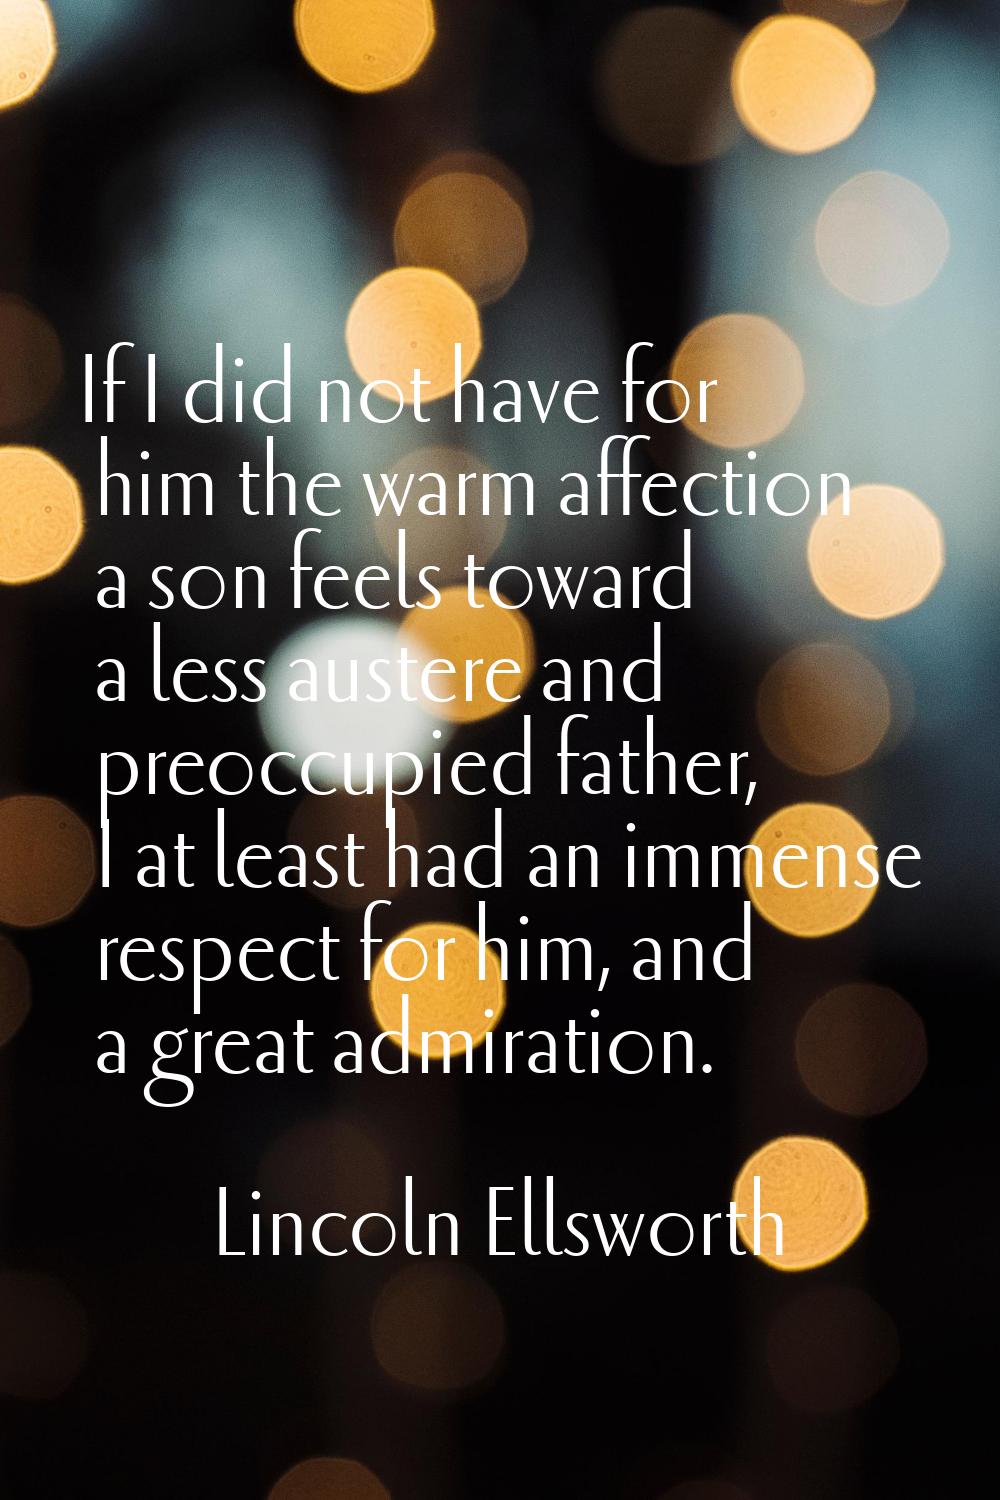 If I did not have for him the warm affection a son feels toward a less austere and preoccupied fath